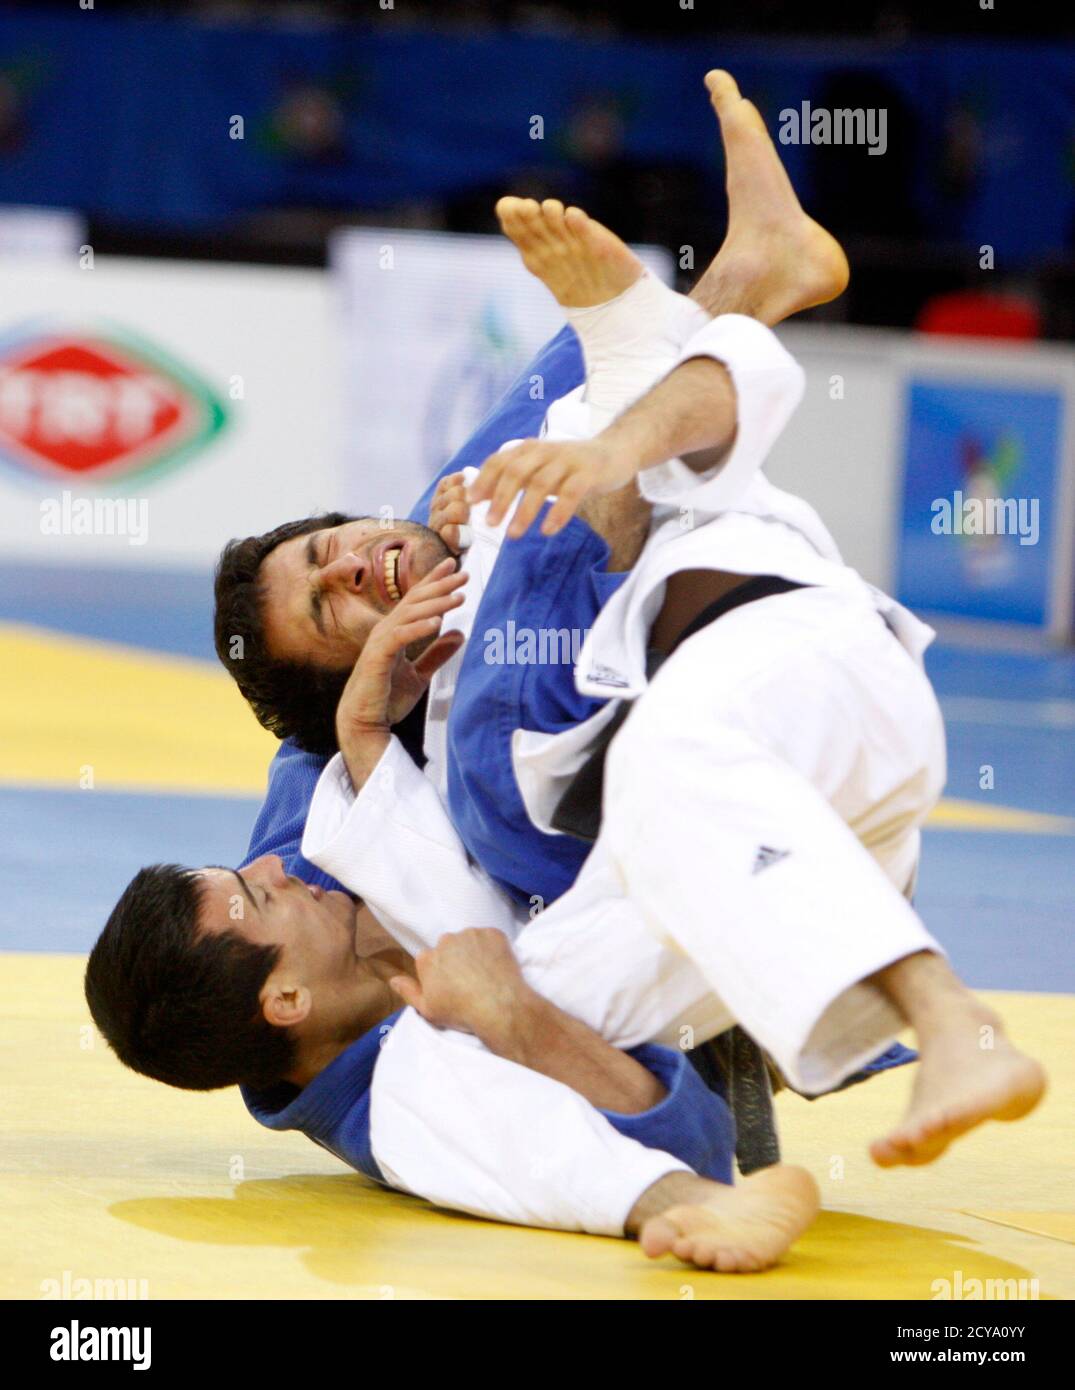 Ukraine's Georgii Zantaraia (in blue) and Georgia's Betkil Shukvani compete during their men's under 60 kg final match at the Judo European Championships in Istanbul April 21, 2011. REUTERS/Osman Orsal (TURKEY - Tags: SPORT JUDO) Stock Photo